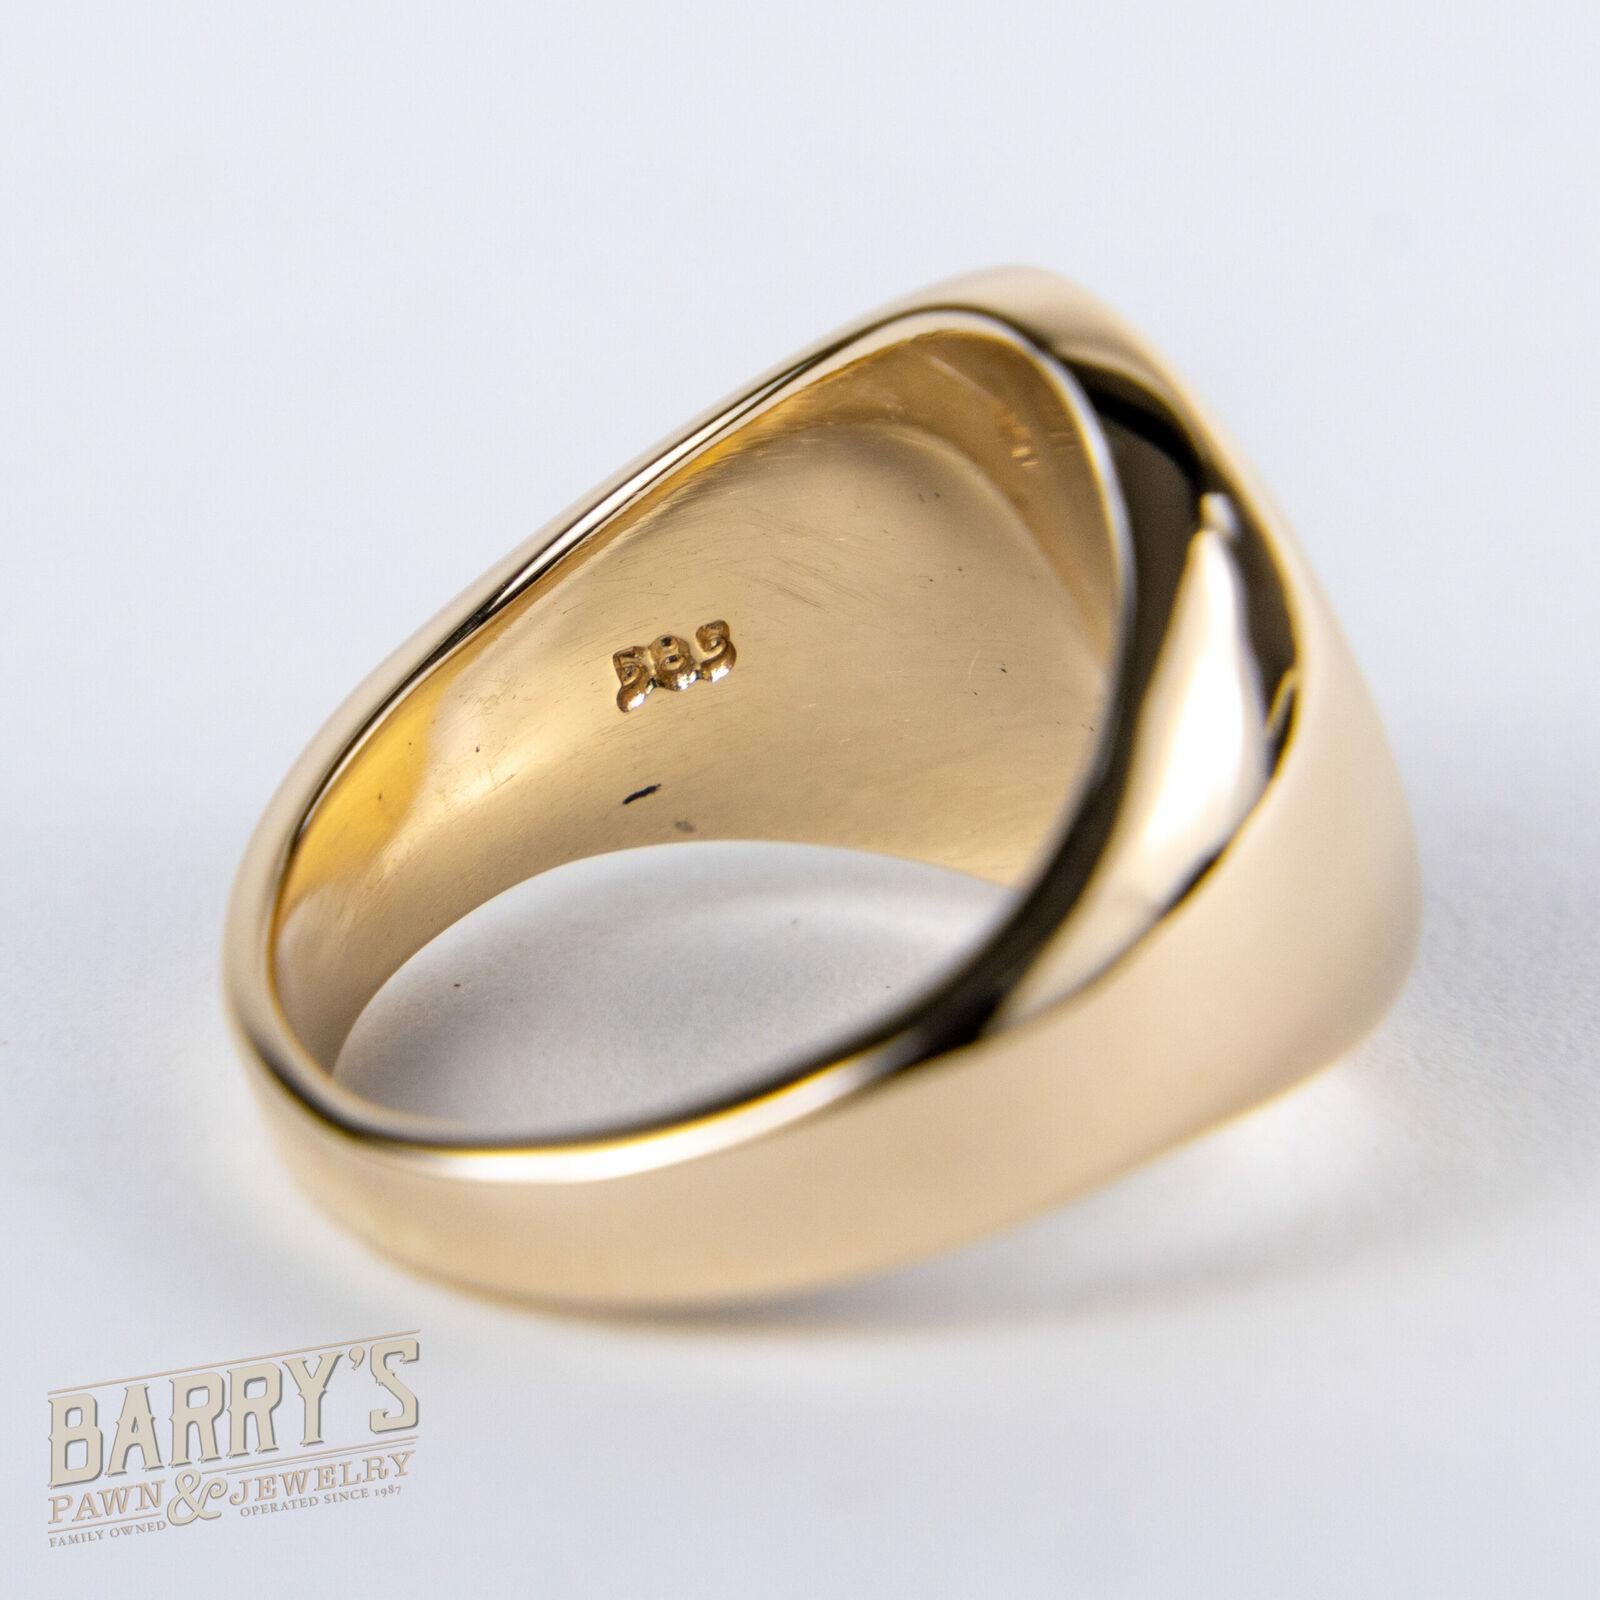 troy bolton ring